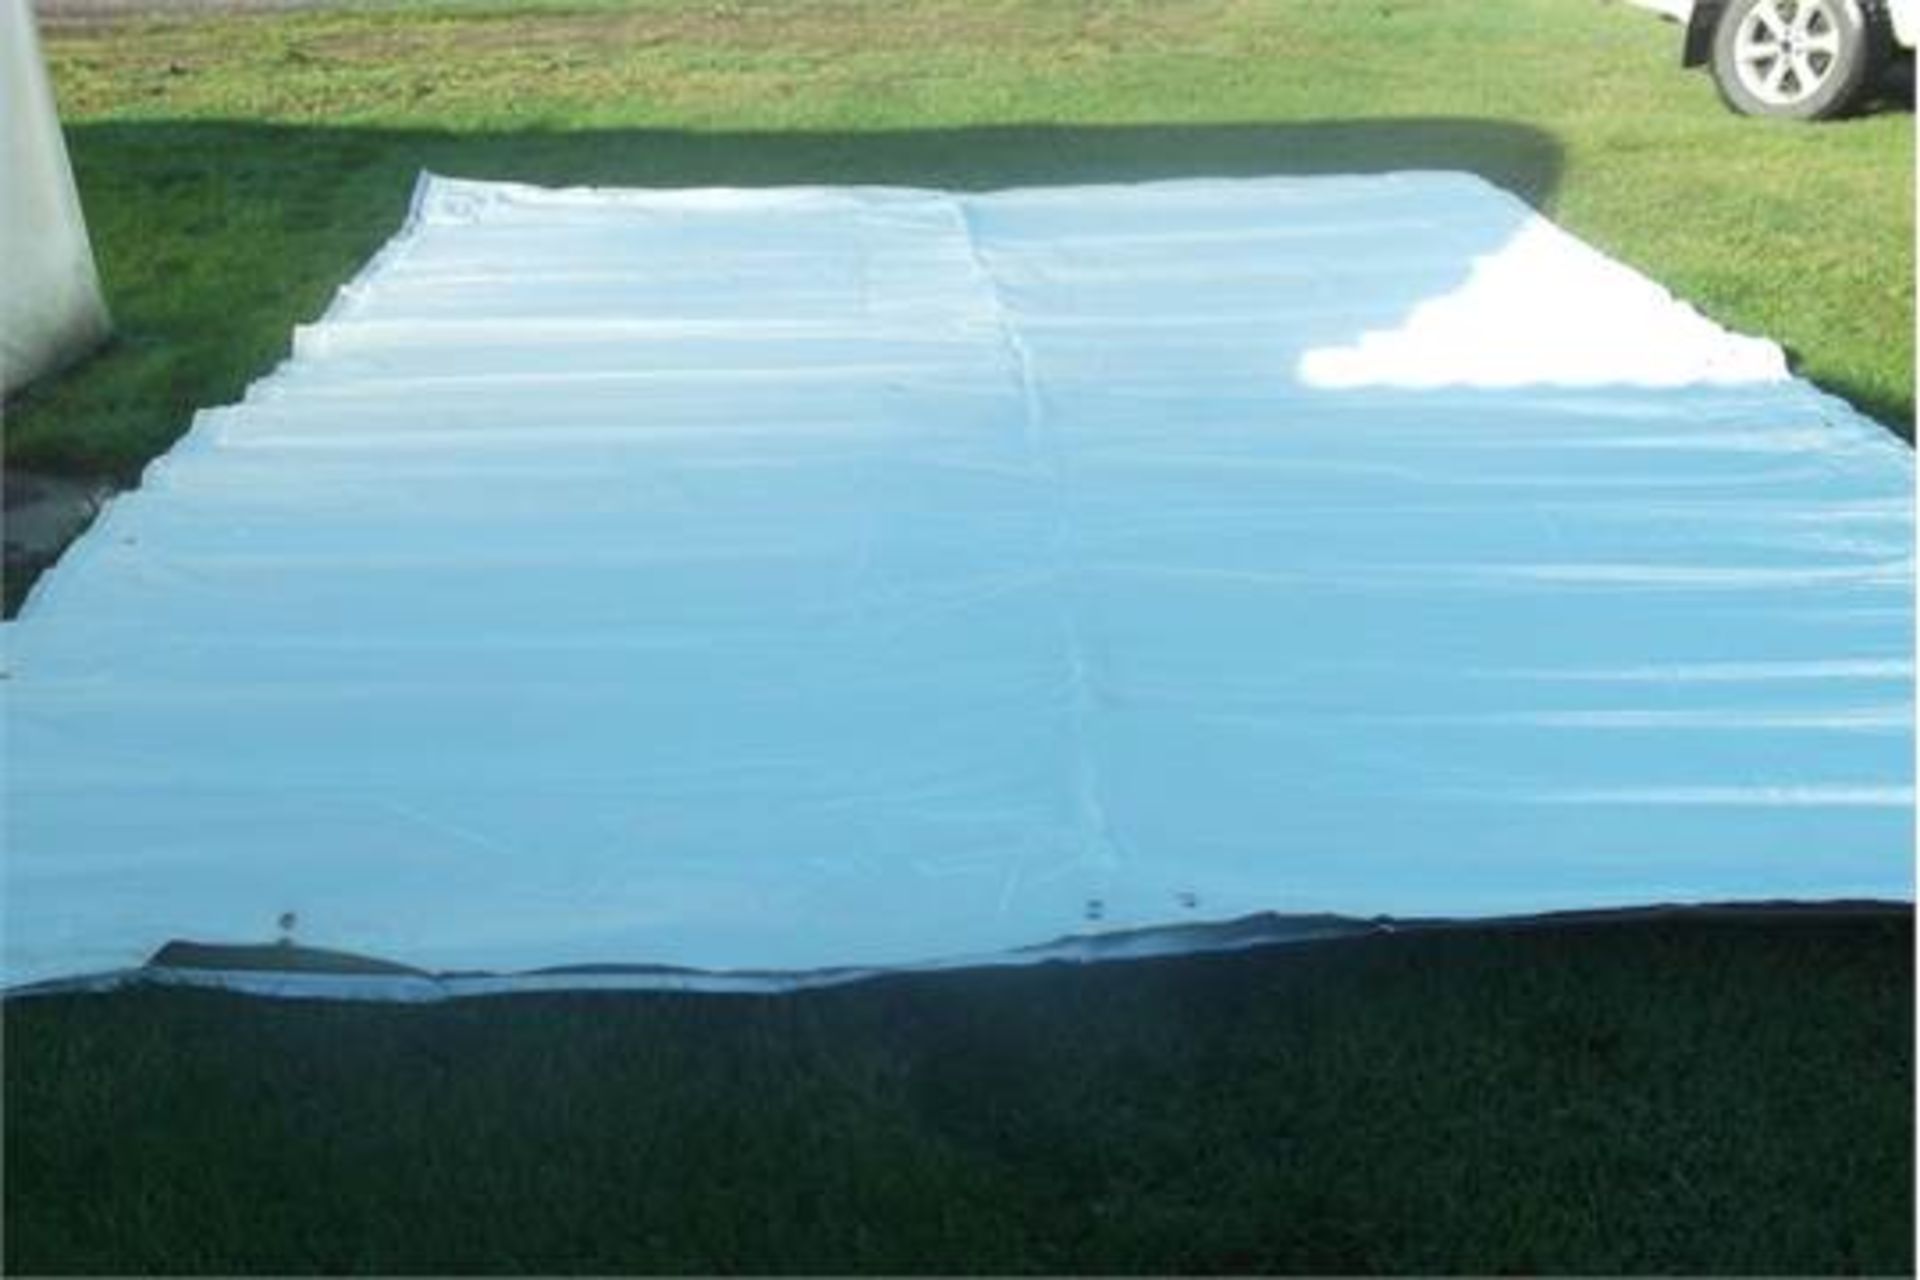 * Thermal insulated tarpaulin 13' x 20', double sided with brass eyelets, white both sides. Please